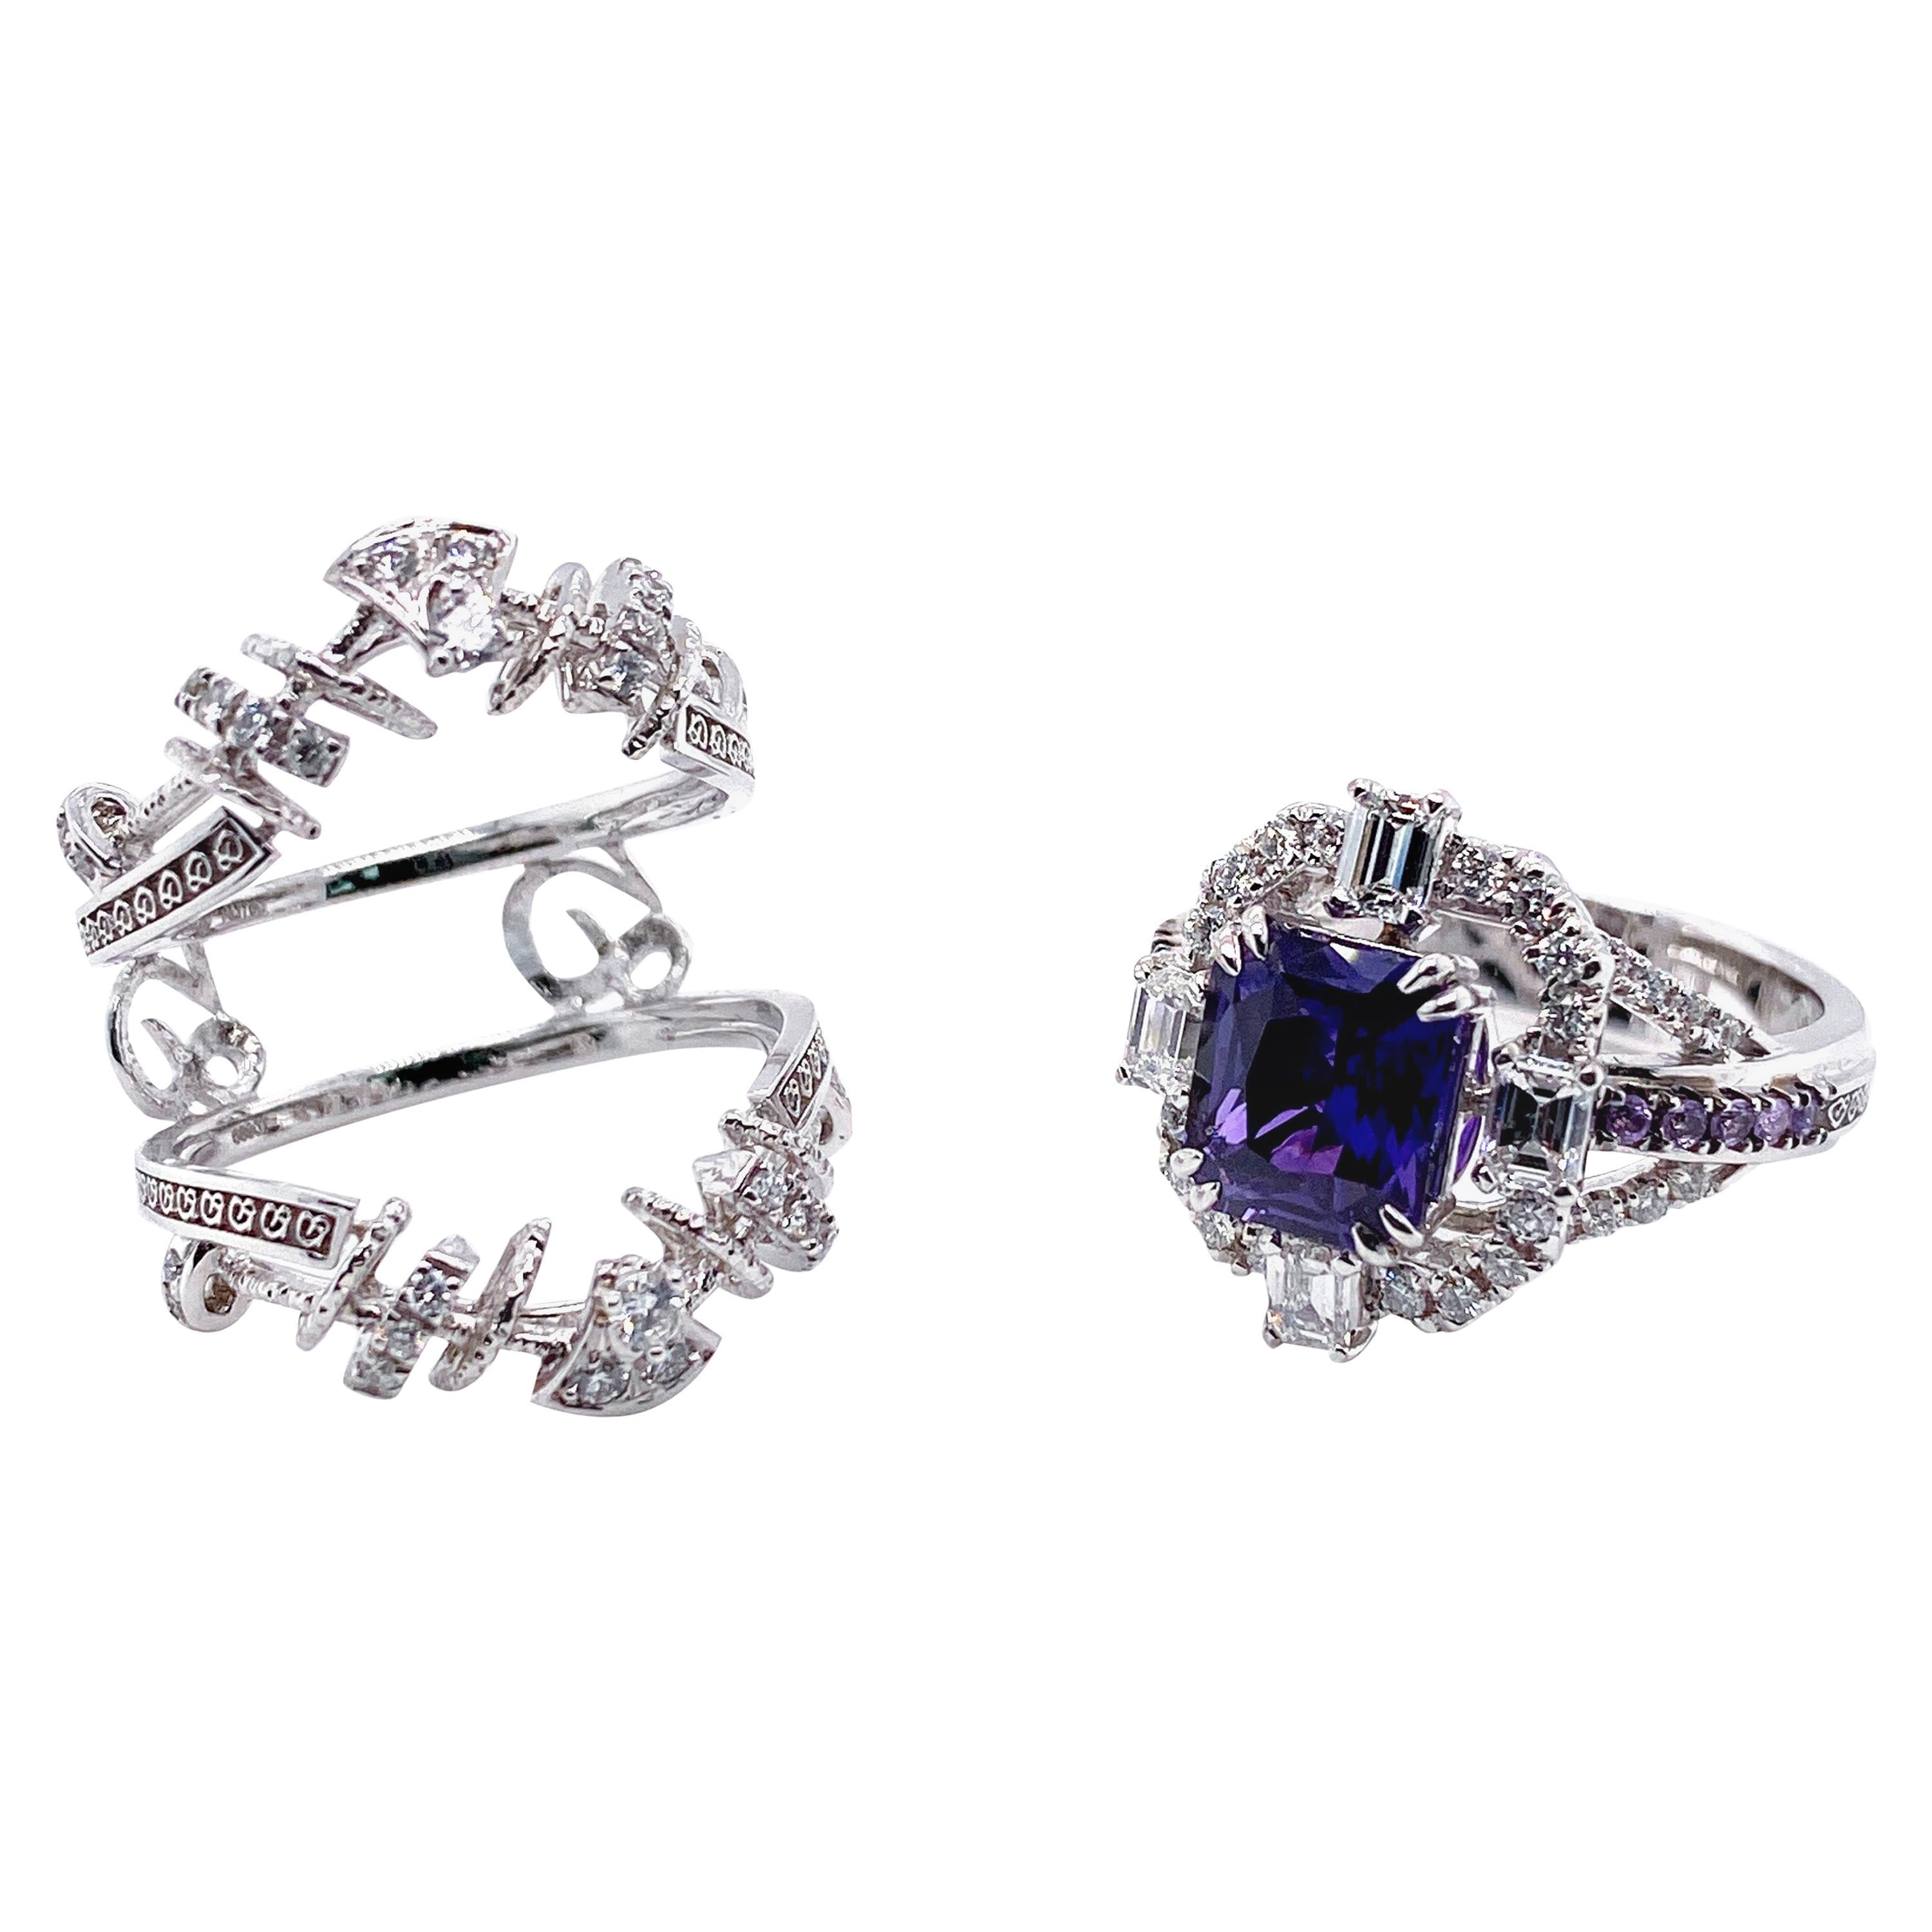 2.42 Carat Color-Changing Violet Sapphire and Diamond Collectible Ring